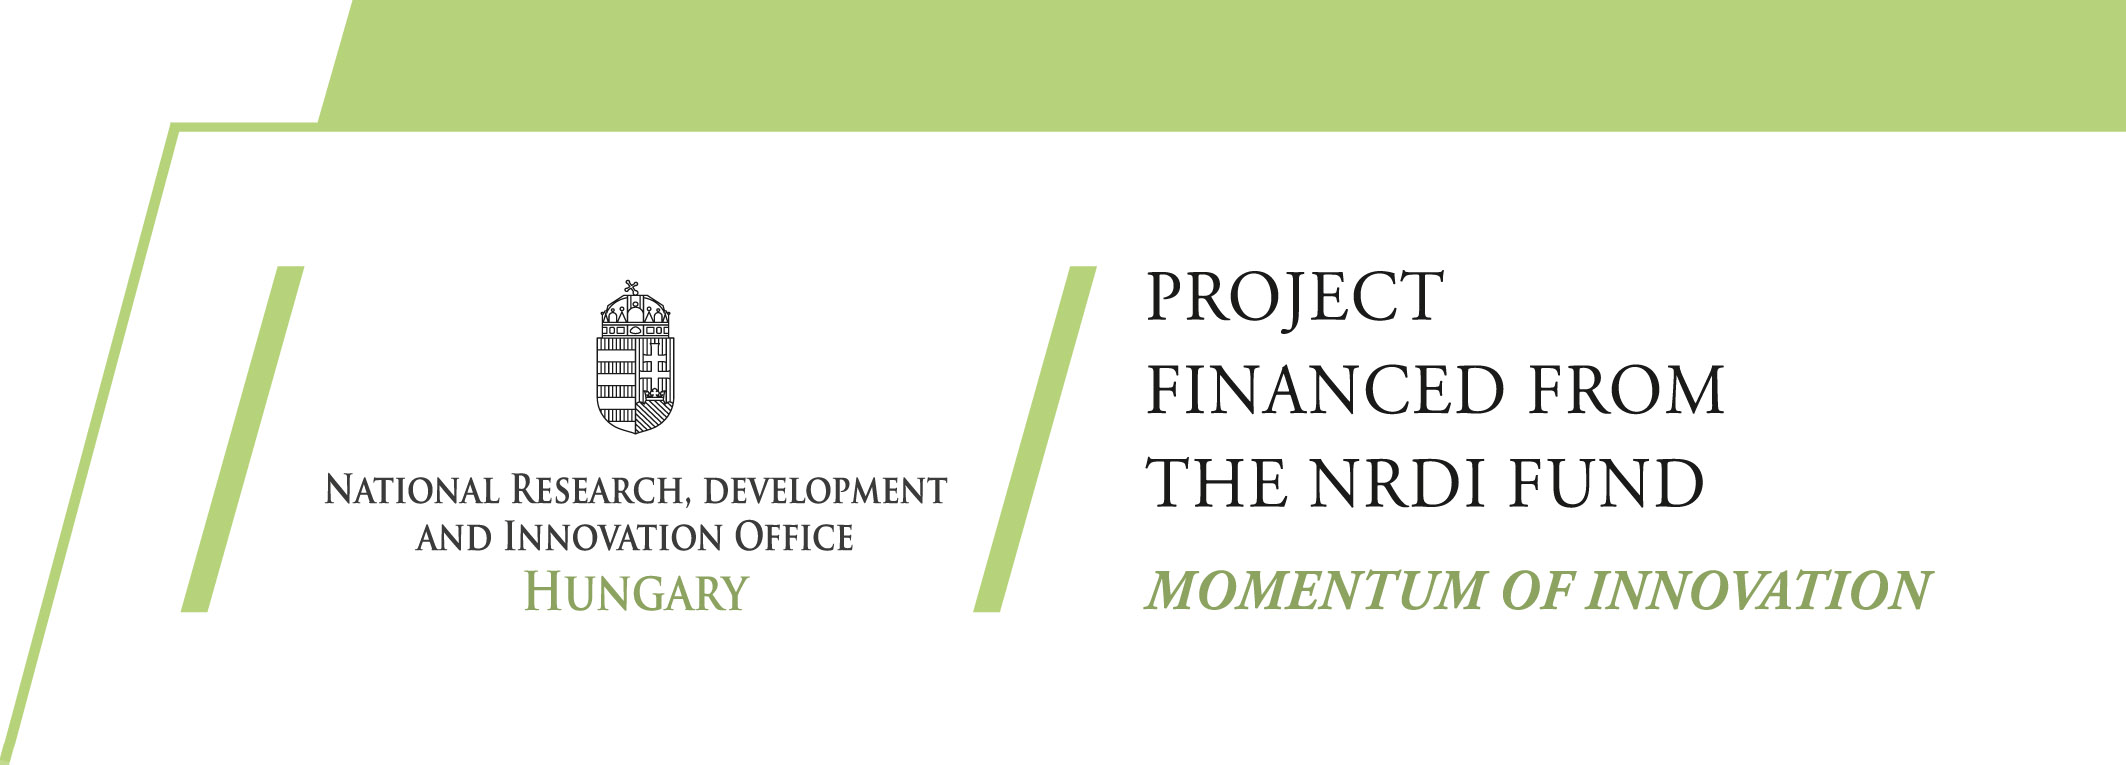 Project financed from the NRDI found